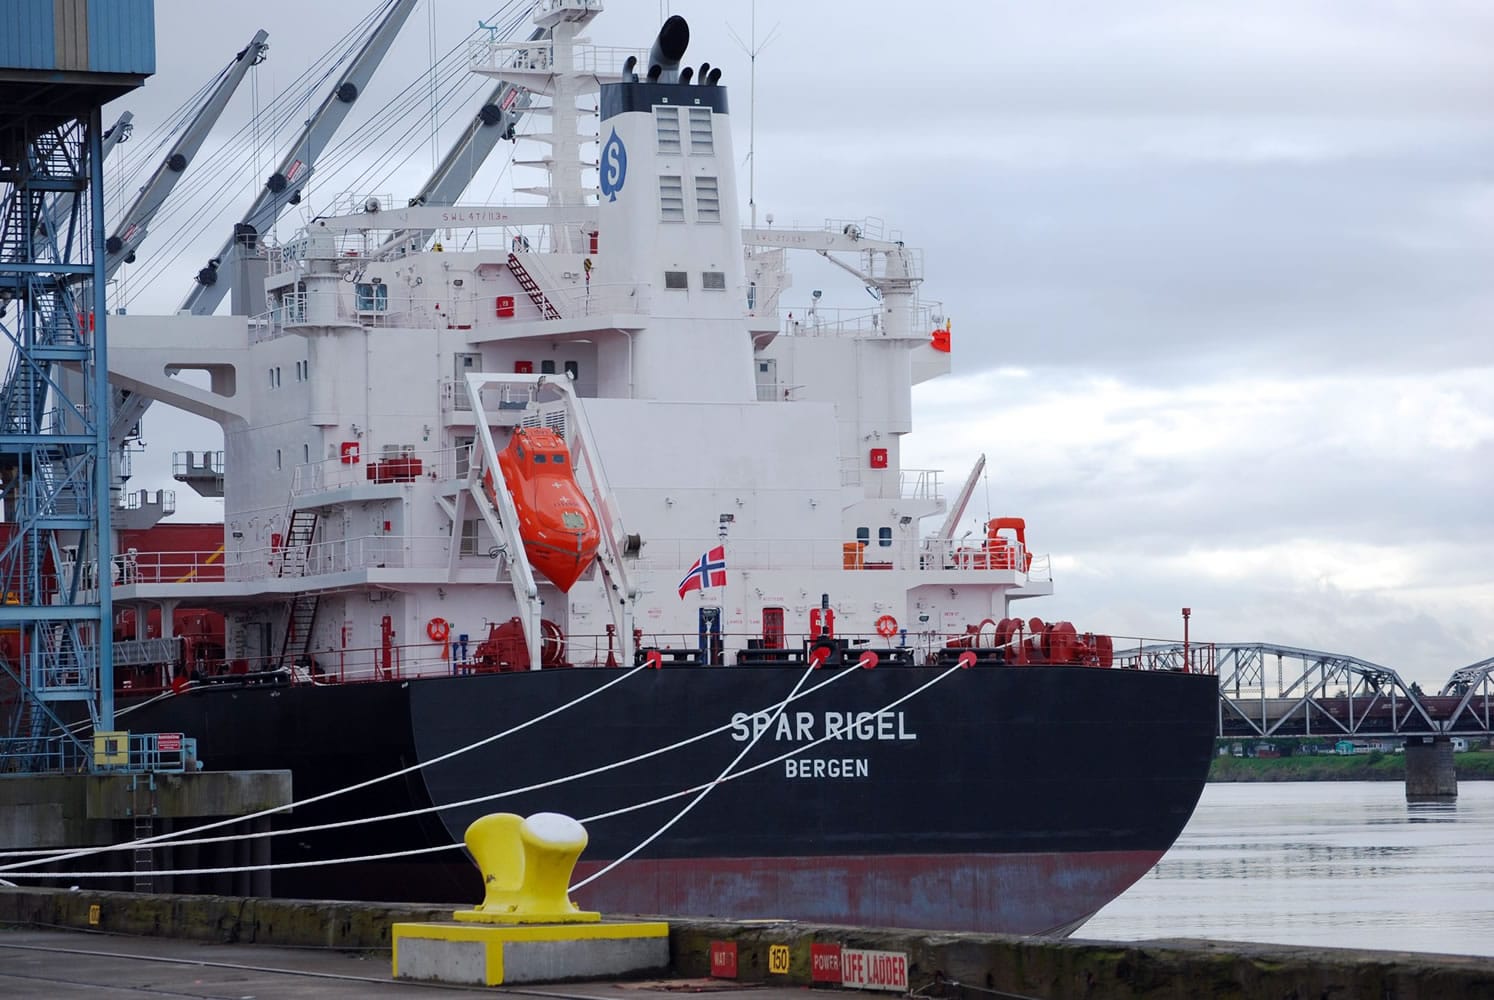 The grain ship Spar Rigel, docks for loading at the Port of Vancouver, which exported 3.6 million metric tons of wheat in 2011, a 2.7 percent decrease from the 3.7 million metric tons of wheat shipped in 2010.